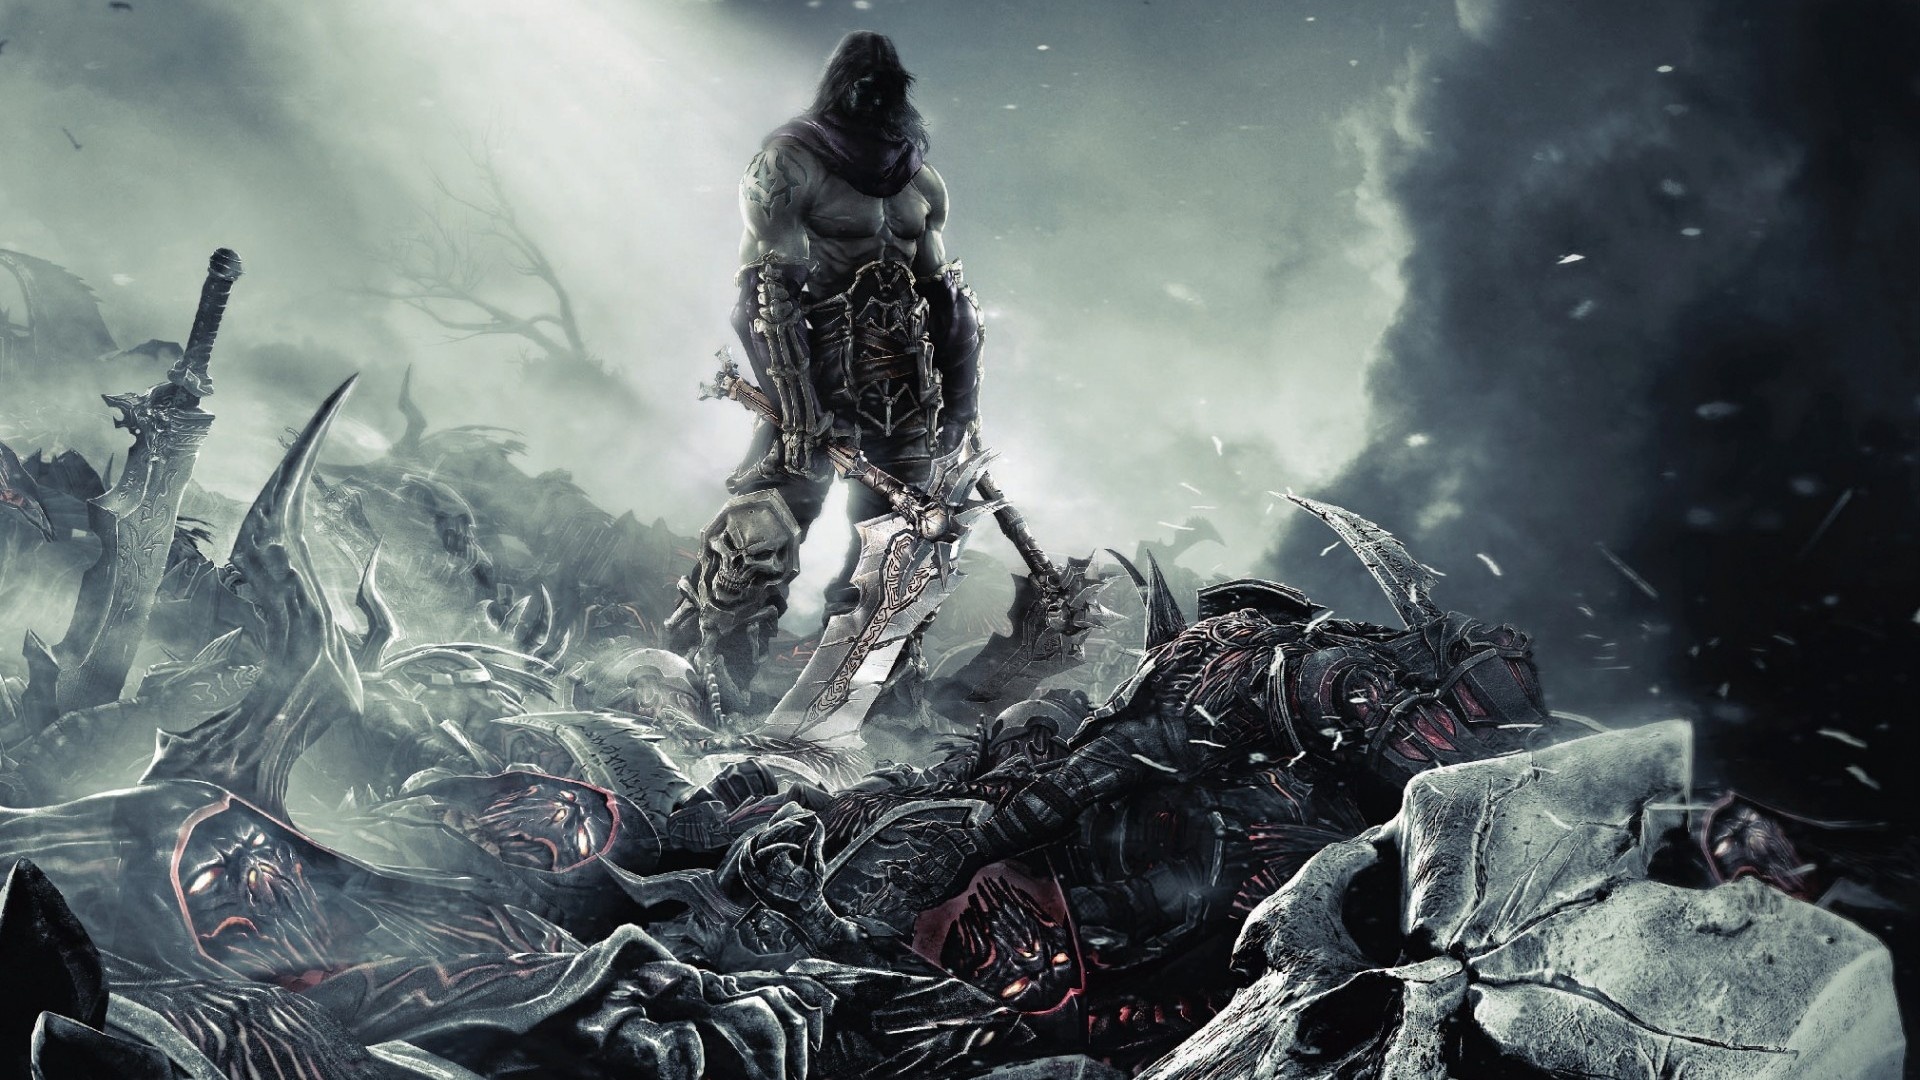 Darksiders 2 Background Wallpapers   1920x1080   687519 1920x1080